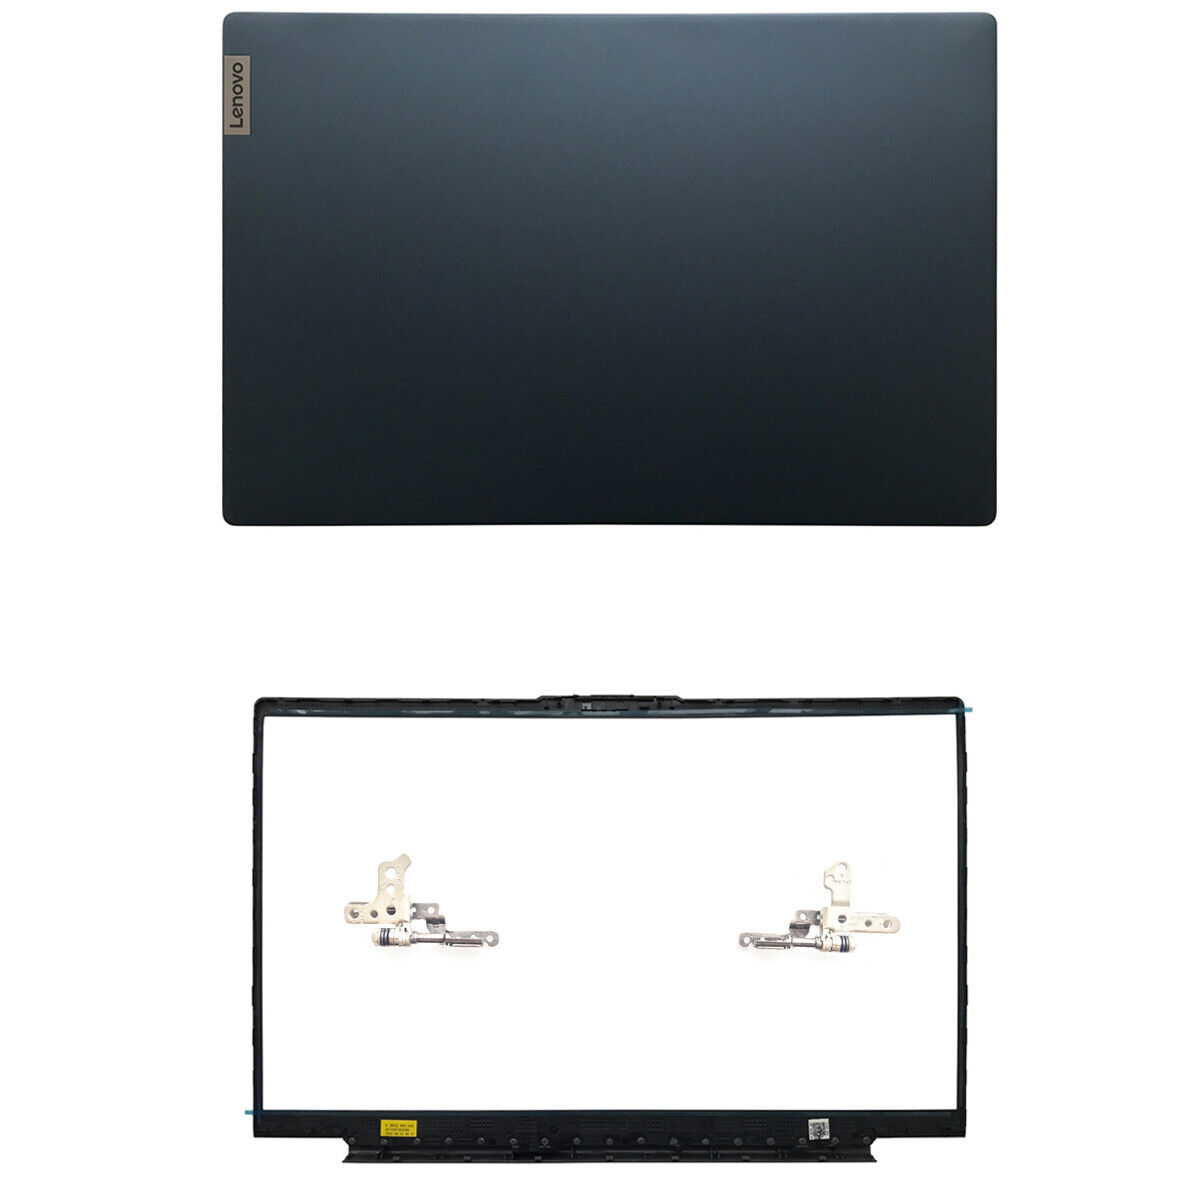 New For Lenovo ideapad 5 15IIL05 15ITL05 15ARE05 Lcd Back Cover with Bezel Hinge